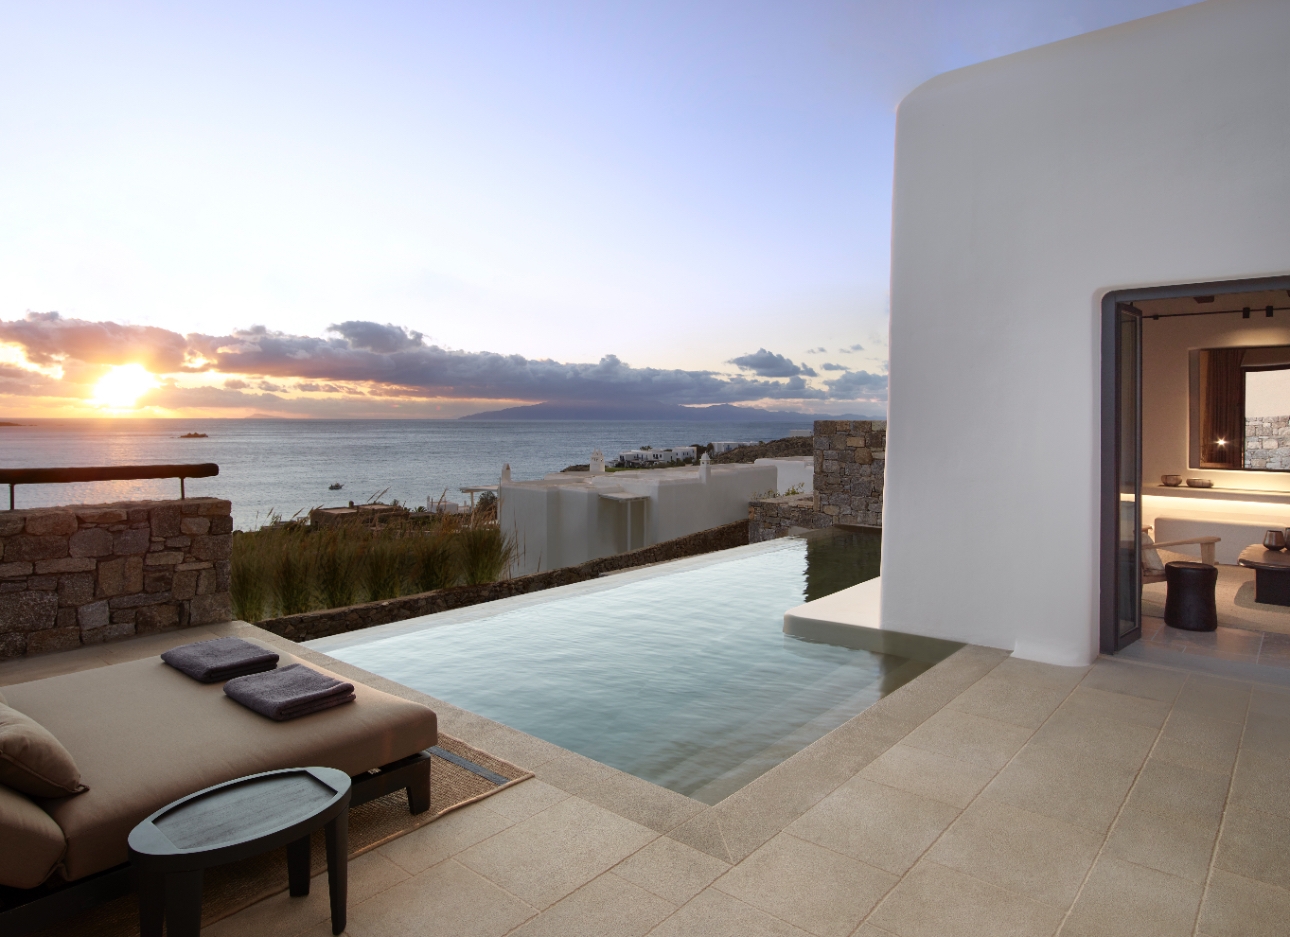 Check out Kalesma in Mykonos for a short-haul honeymoon: Image 1